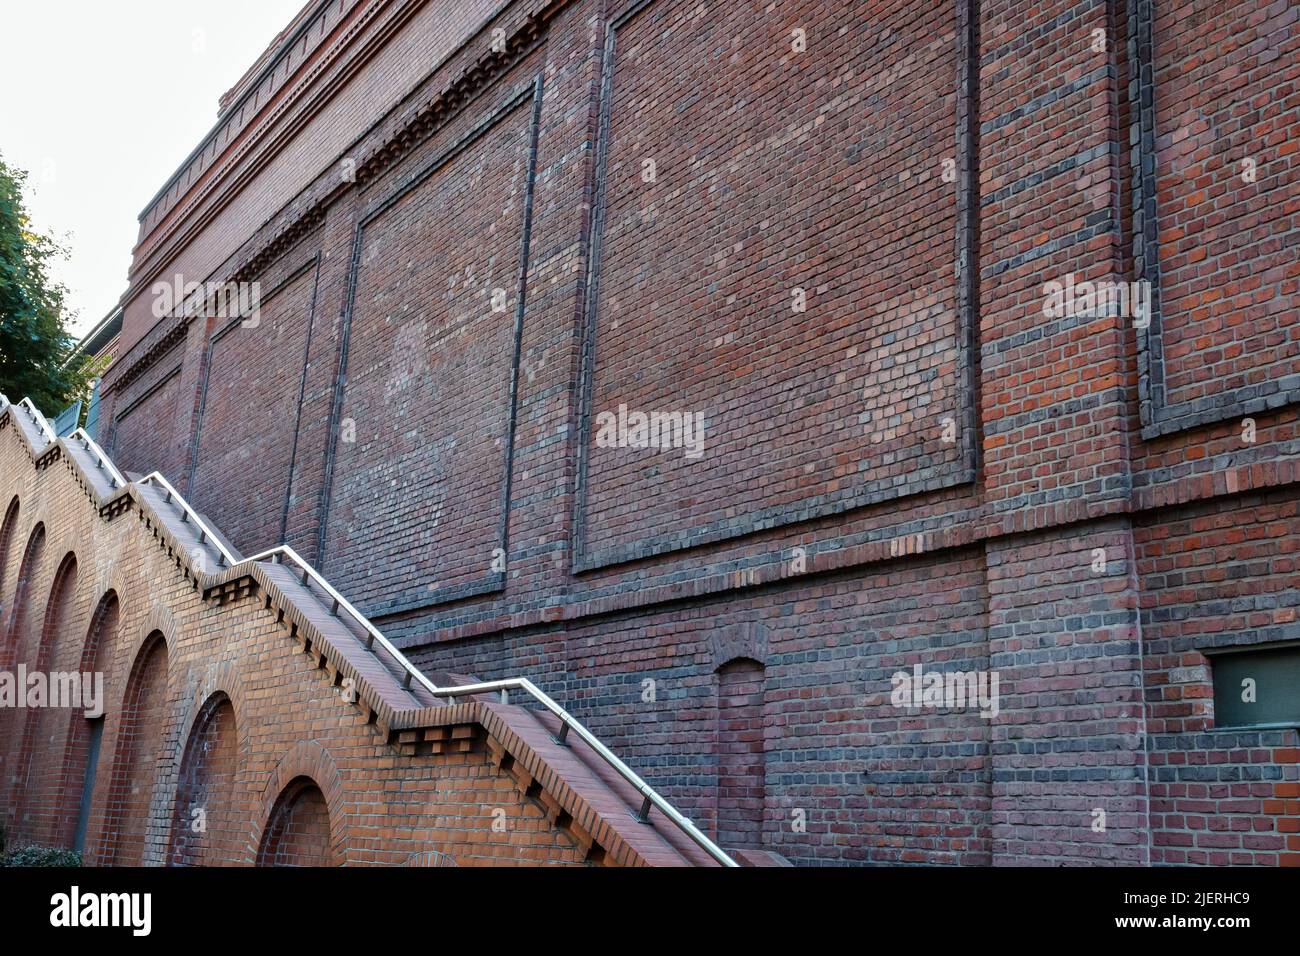 POZNAŃ, POLAND - JUNE 16, 2022:  Stairs at the back of the 'Stary Browar' building - the center of commerce and art, built in November 2003 Stock Photo